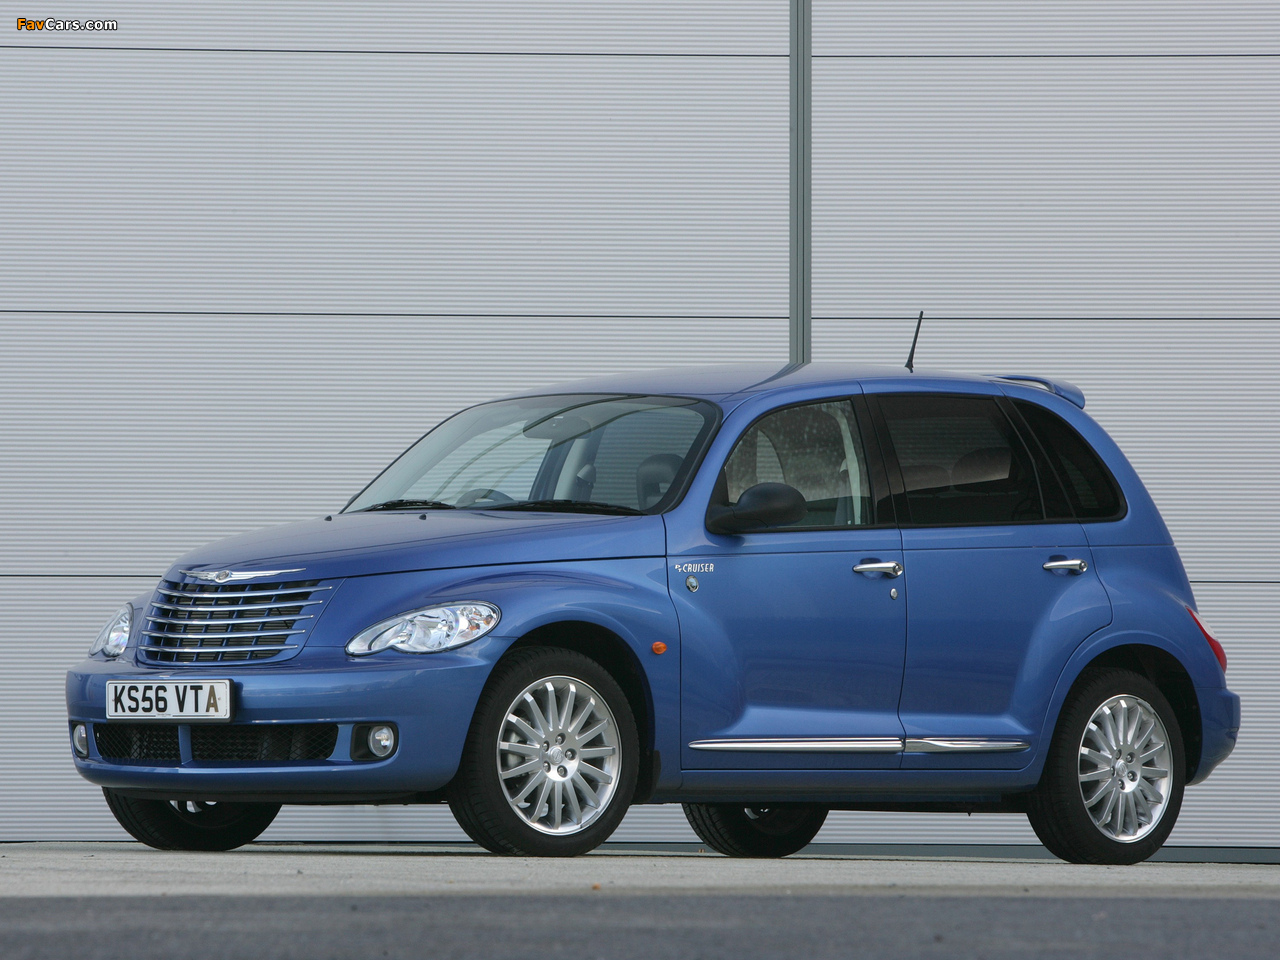 Chrysler PT Street Cruiser Pacific Coast Highway Edition UK-spec 2007 pictures (1280 x 960)